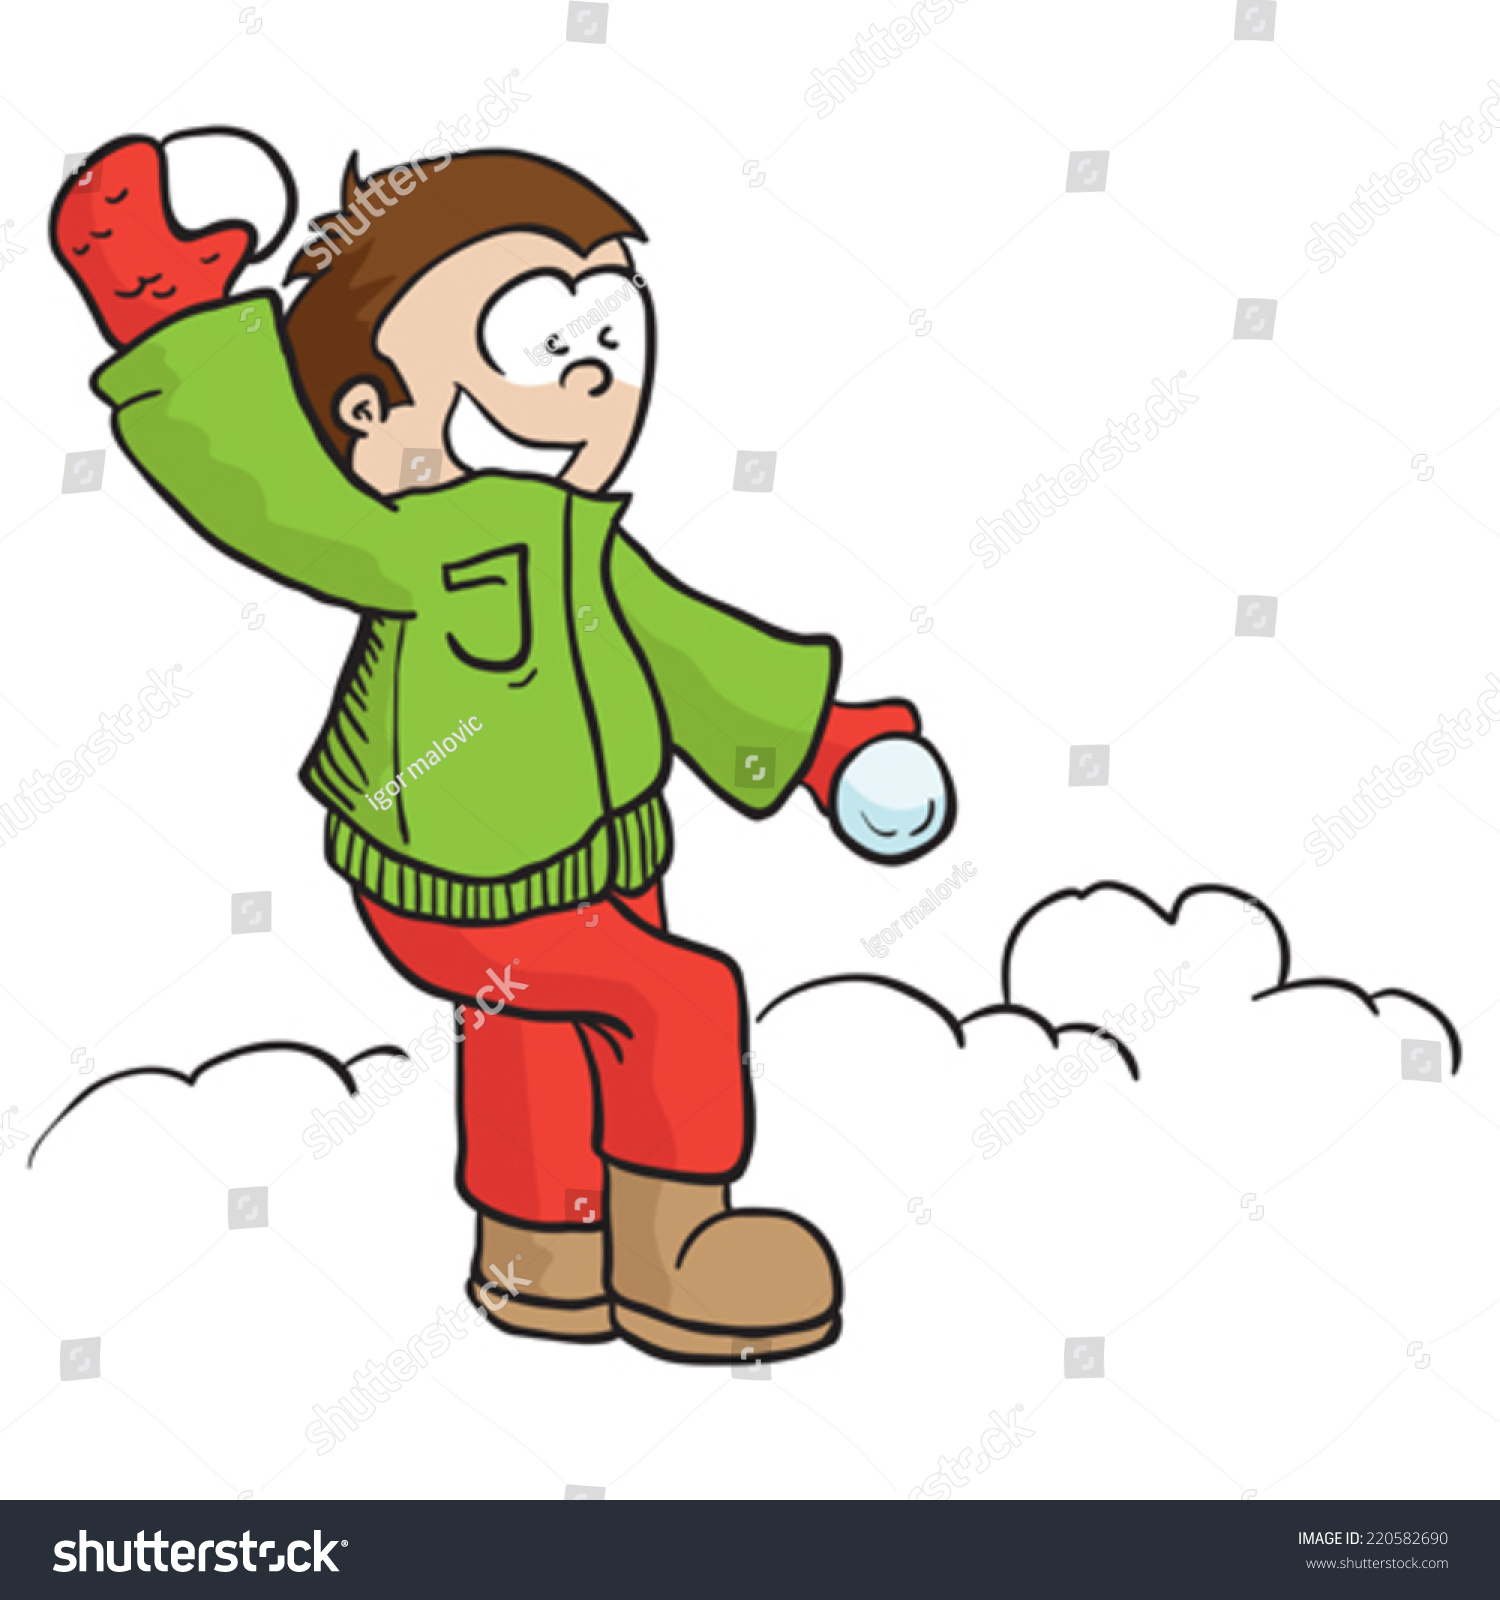 clipart snowball fight - photo #35